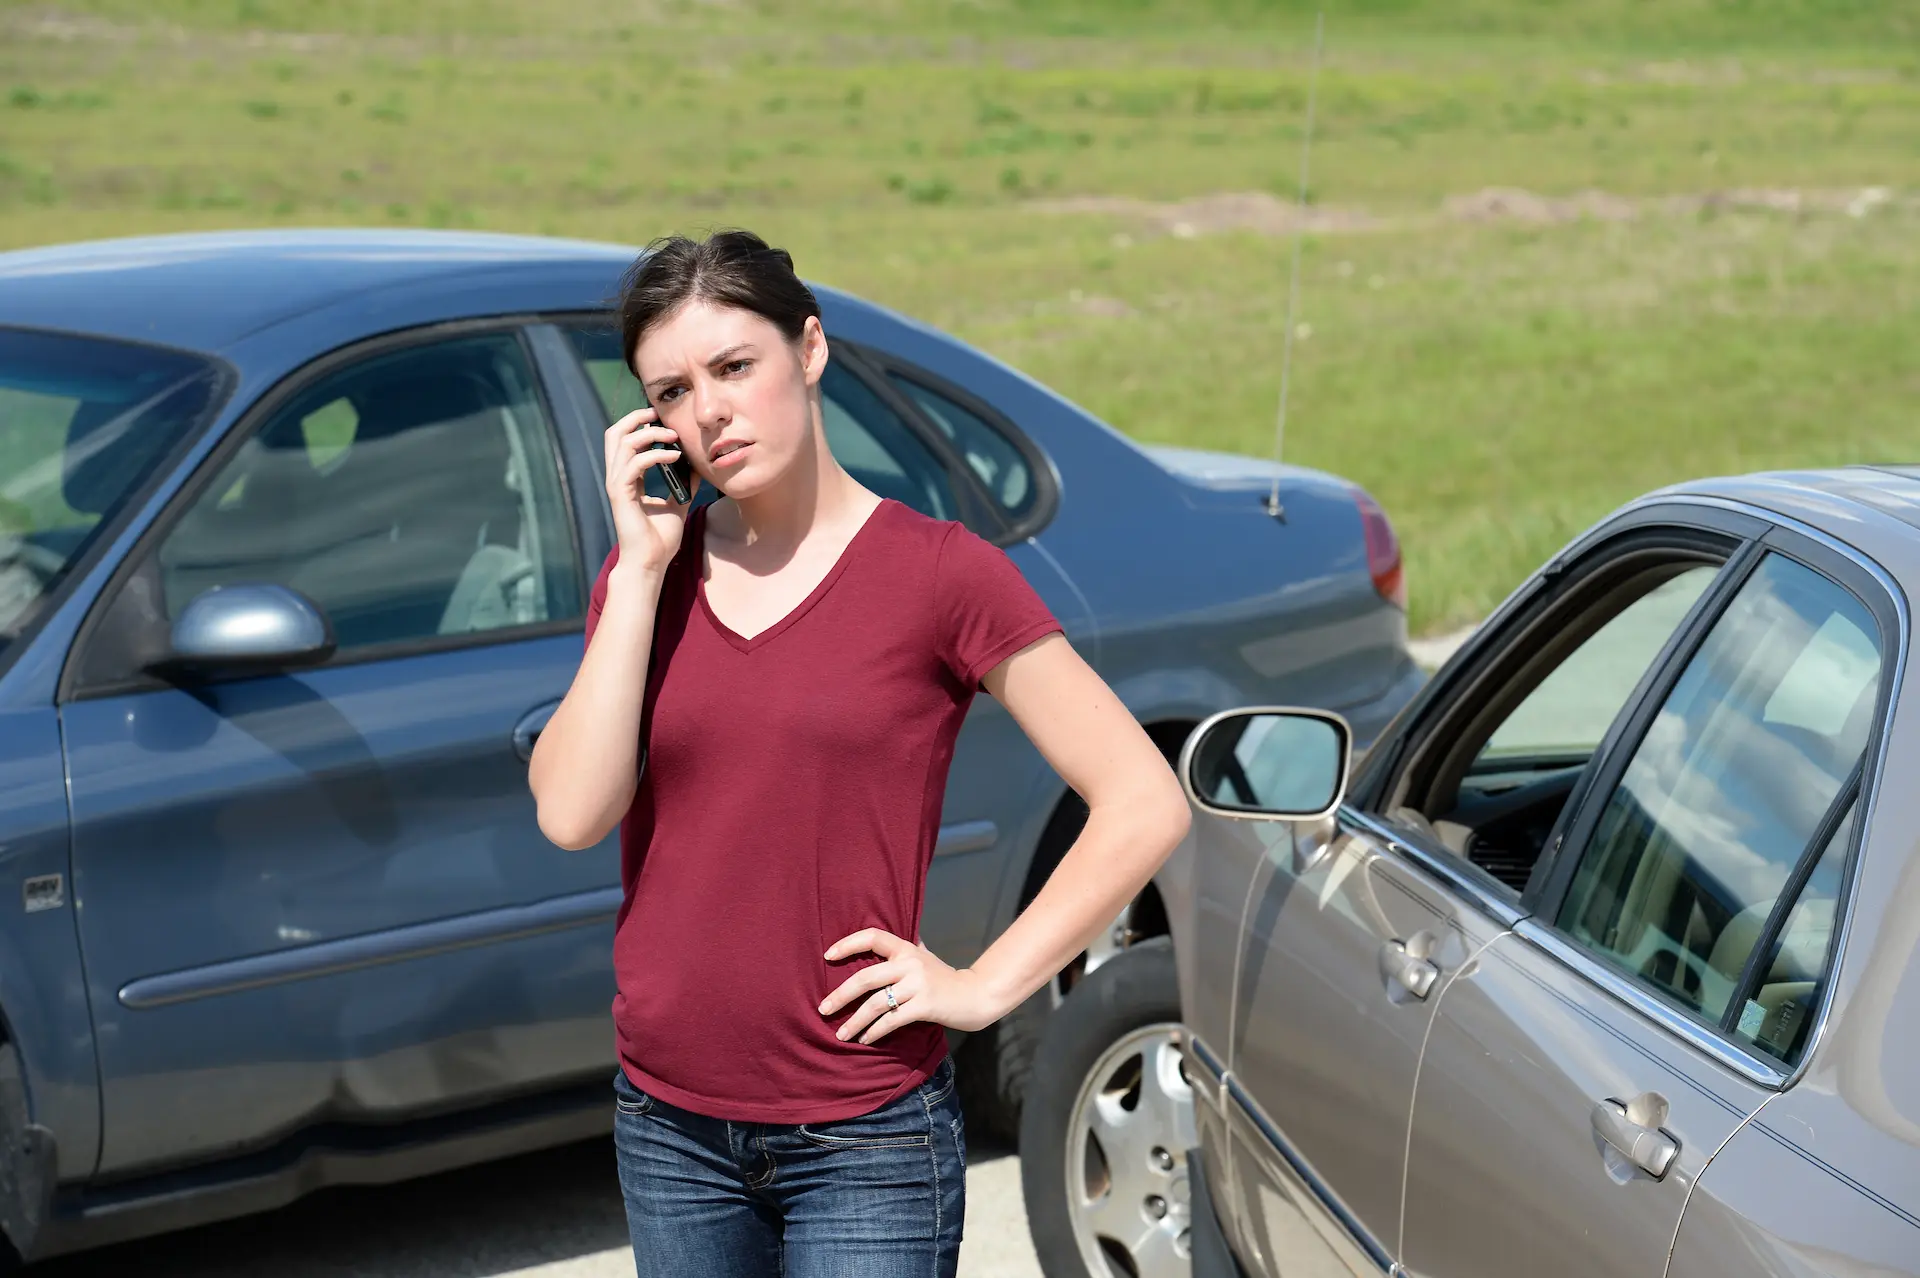 Houston Wrong-Way Driving Accident Lawyer in houston texas